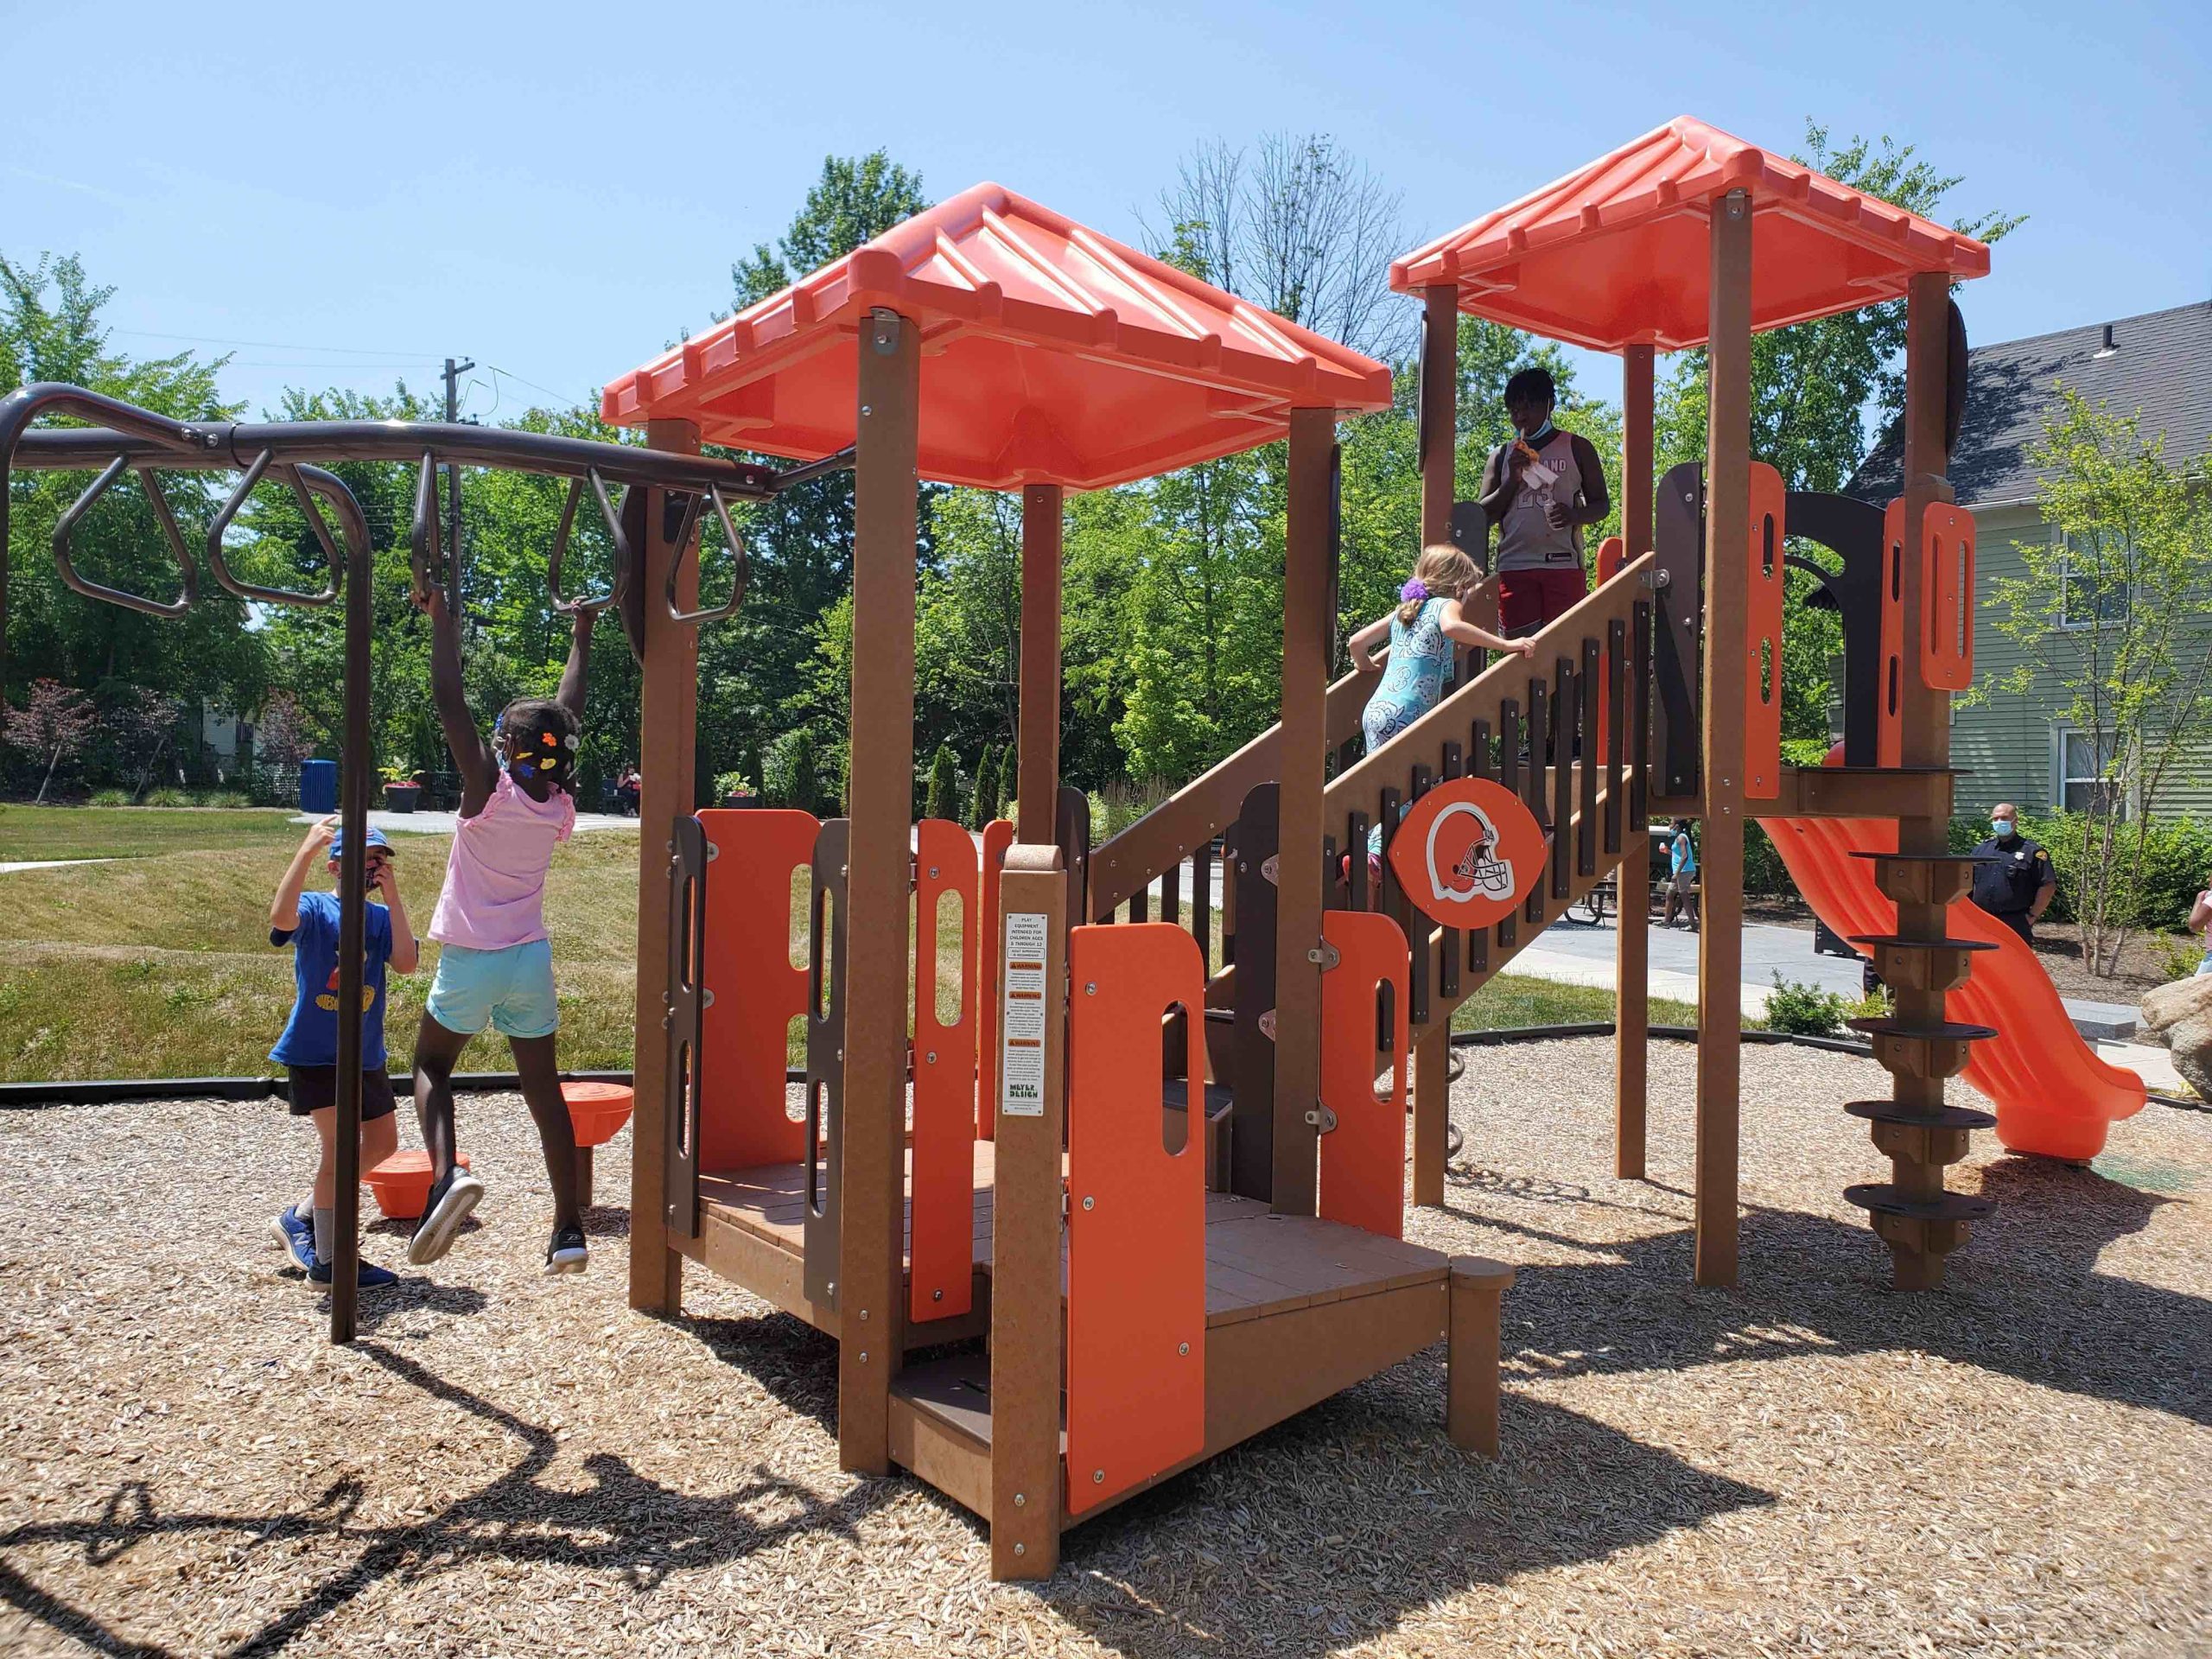 An orange and brown playground apparatus including a slide, monkey bars, and a treehouse, sits on a bed of wood chips in a grassy park on a sunny day. Four children of varying skin tones play on the equipment. Beyond the park area a man in uniform watches the playground and behind him is a clapboard house.